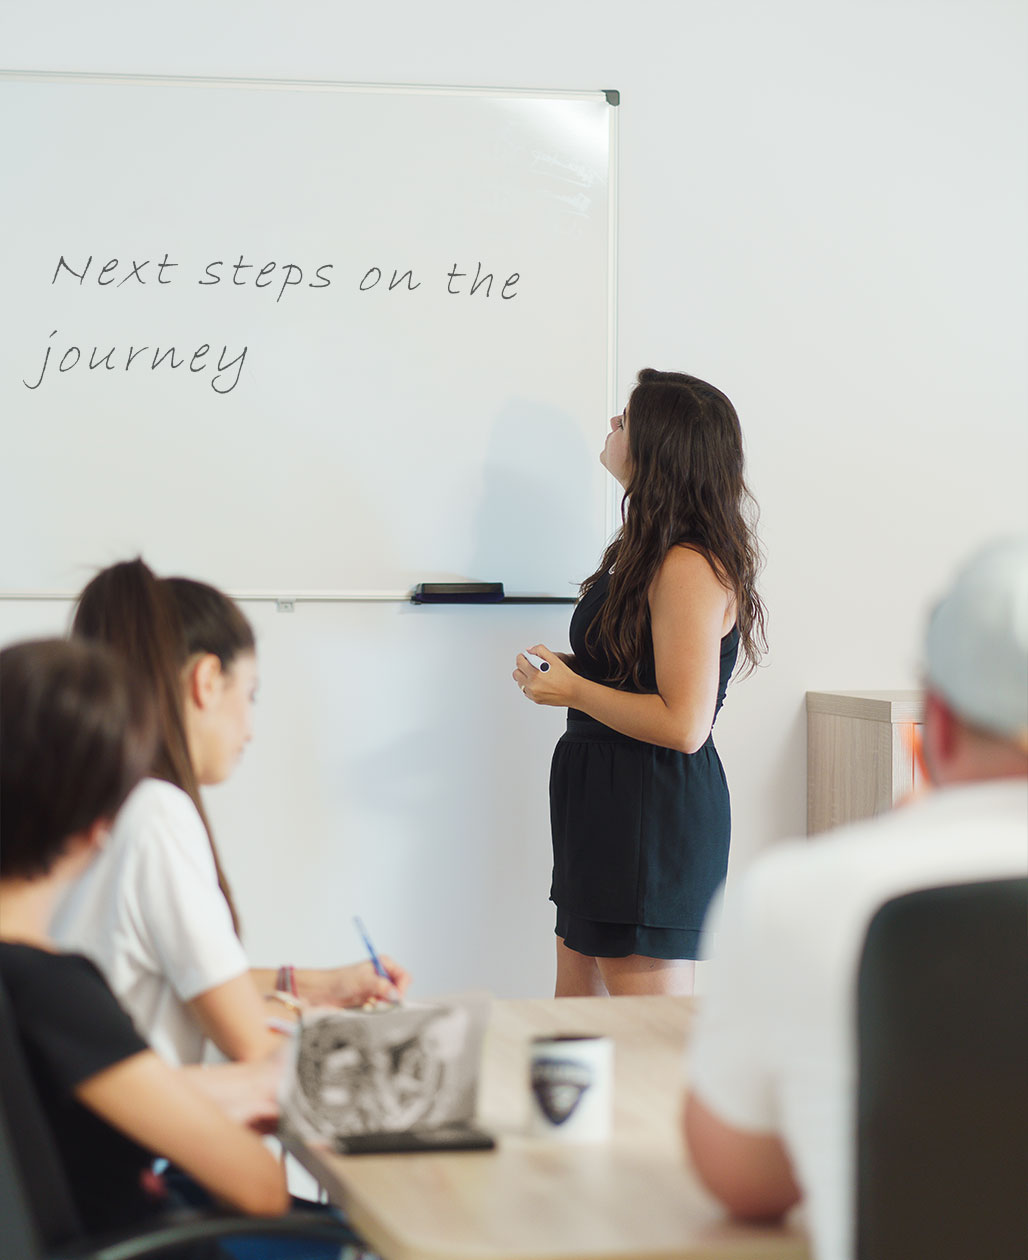 An employee standing in front of a whiteboard with the text Next Steps on the Journey written.